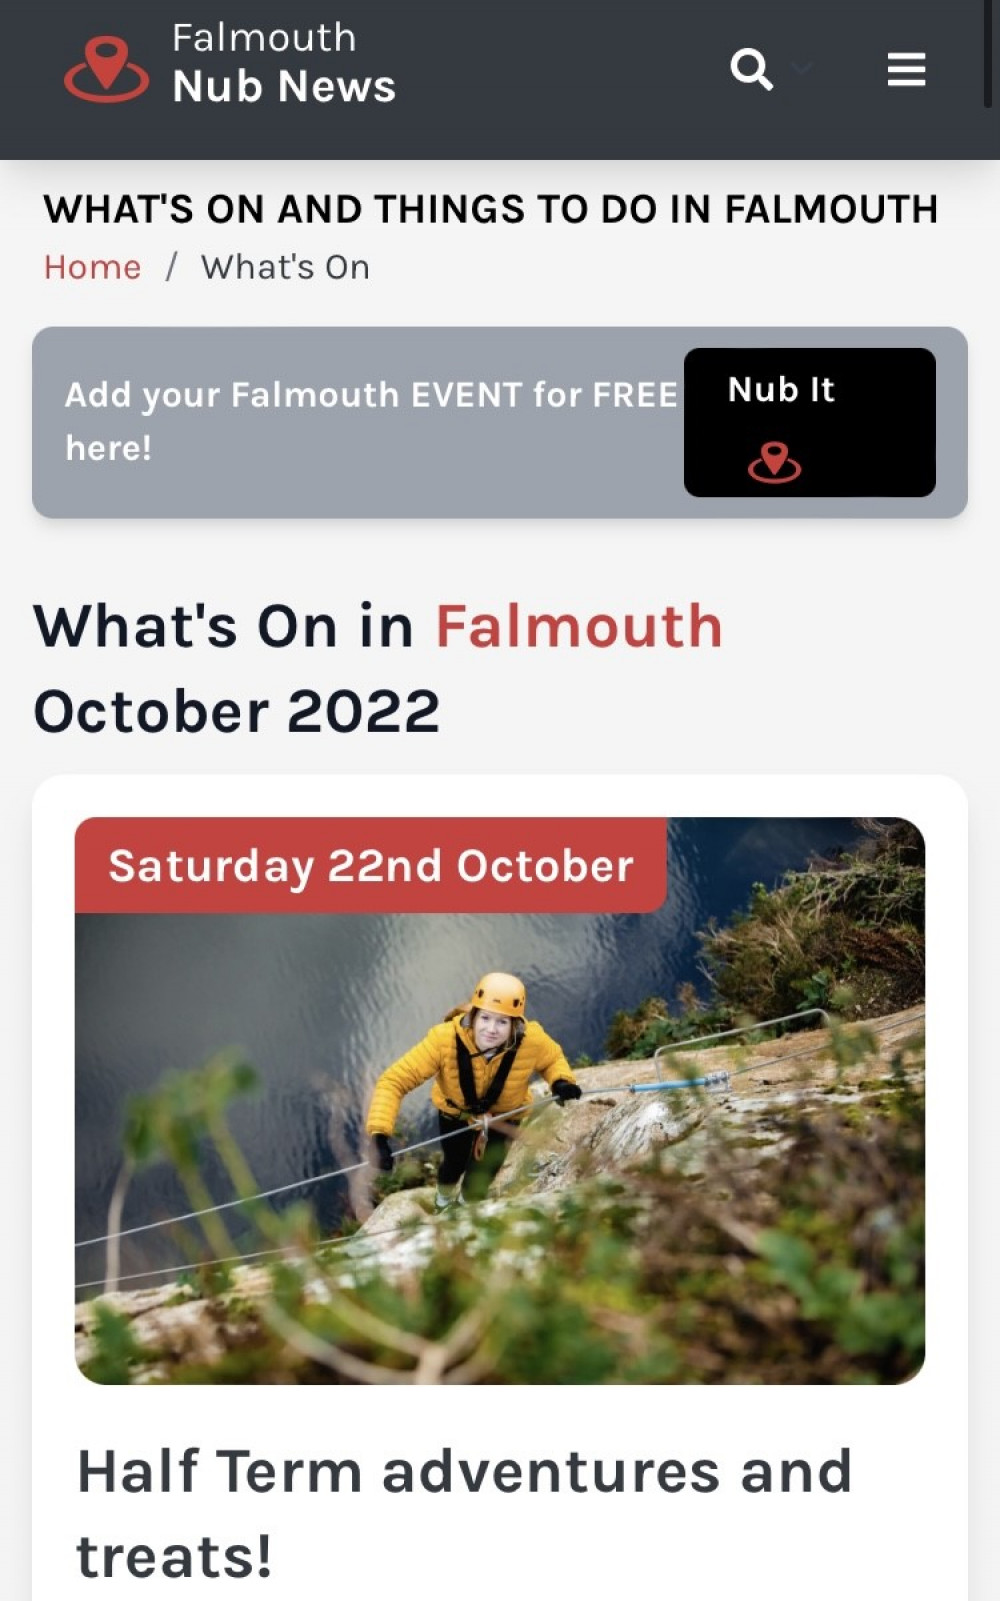 What's on in Falmouth this weekend